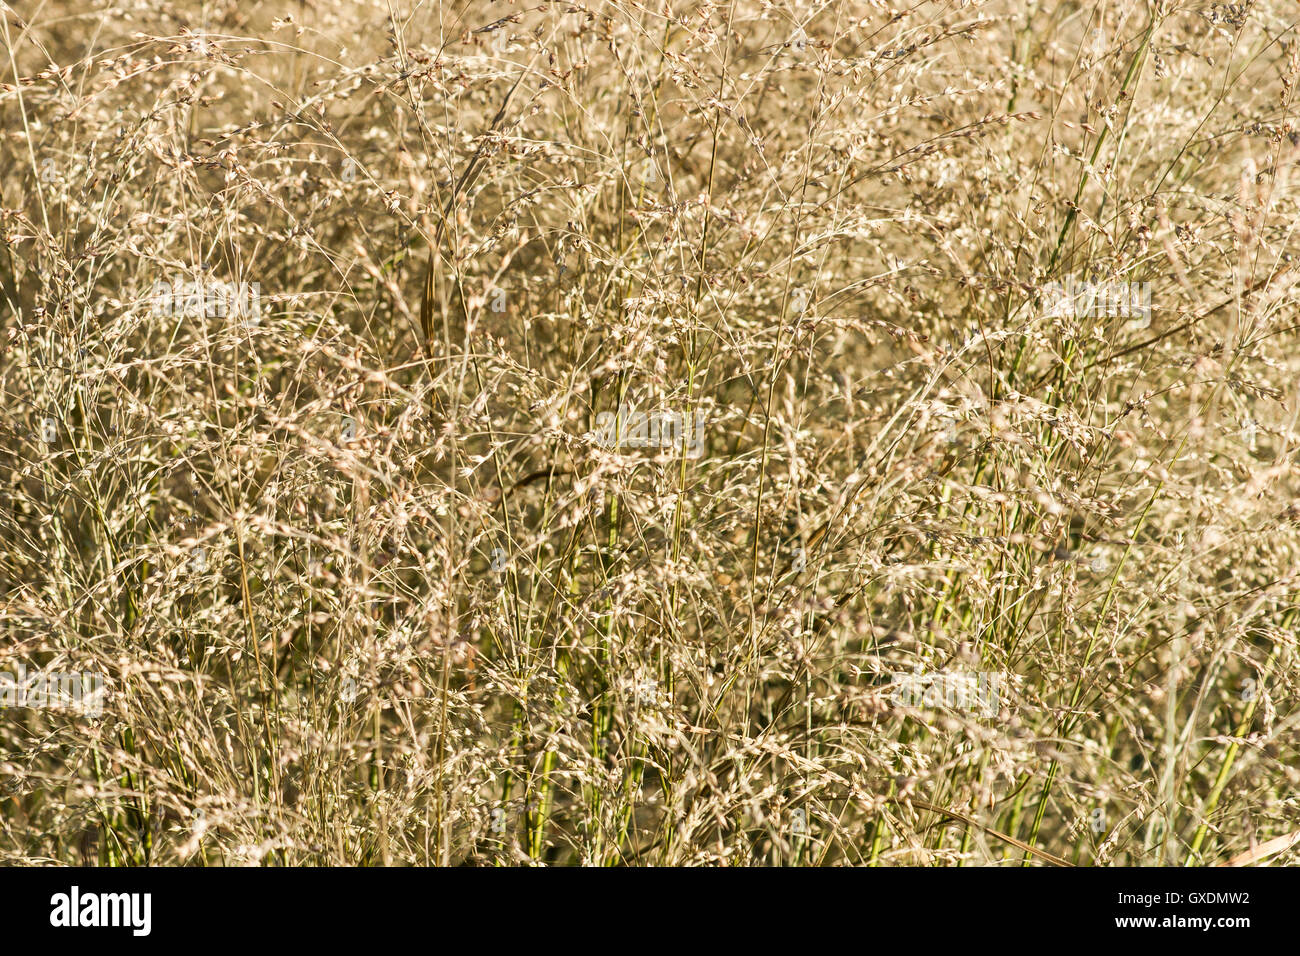 Decorative grass plant or herb full of seeds in autumn. Pale green colors. Autumn theme, floral background Stock Photo